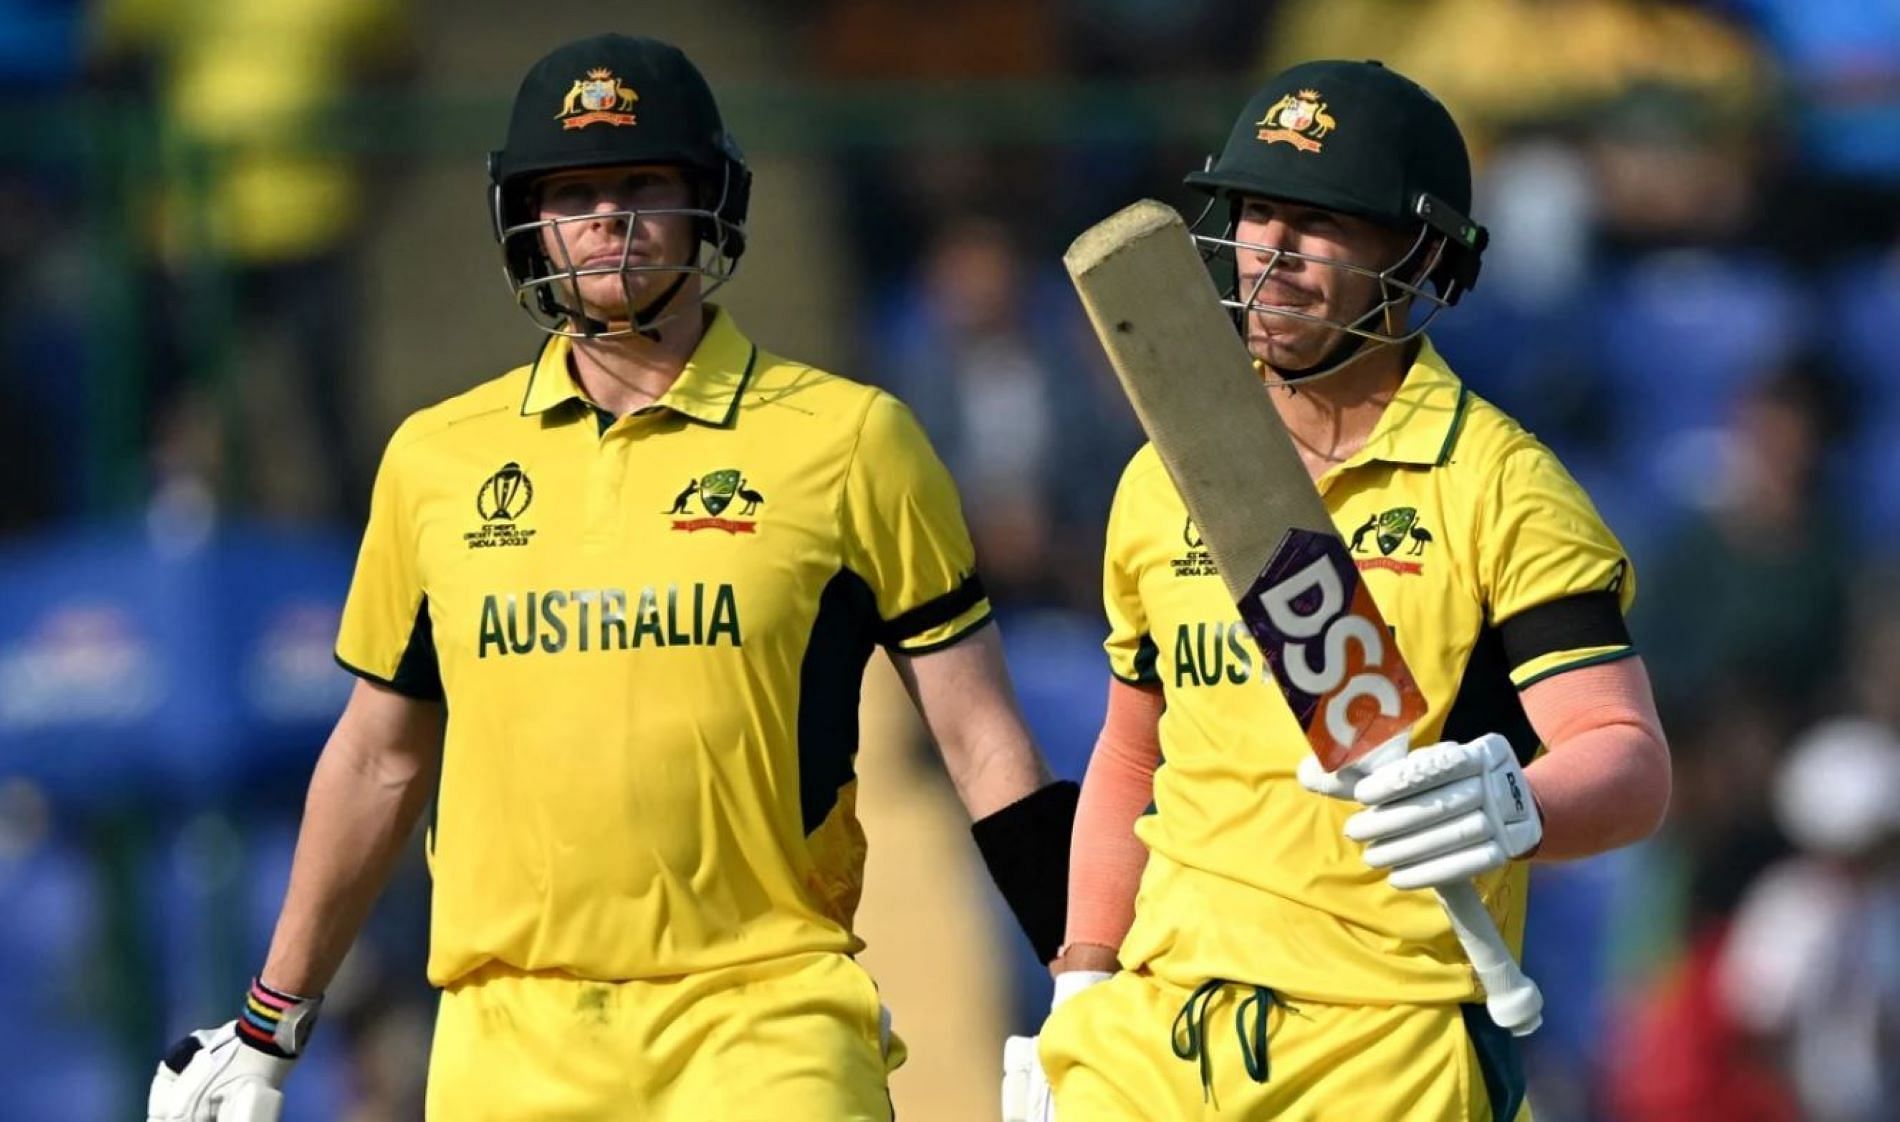 David Warner and Steve Smith put Australia in control with their 132-run stand.